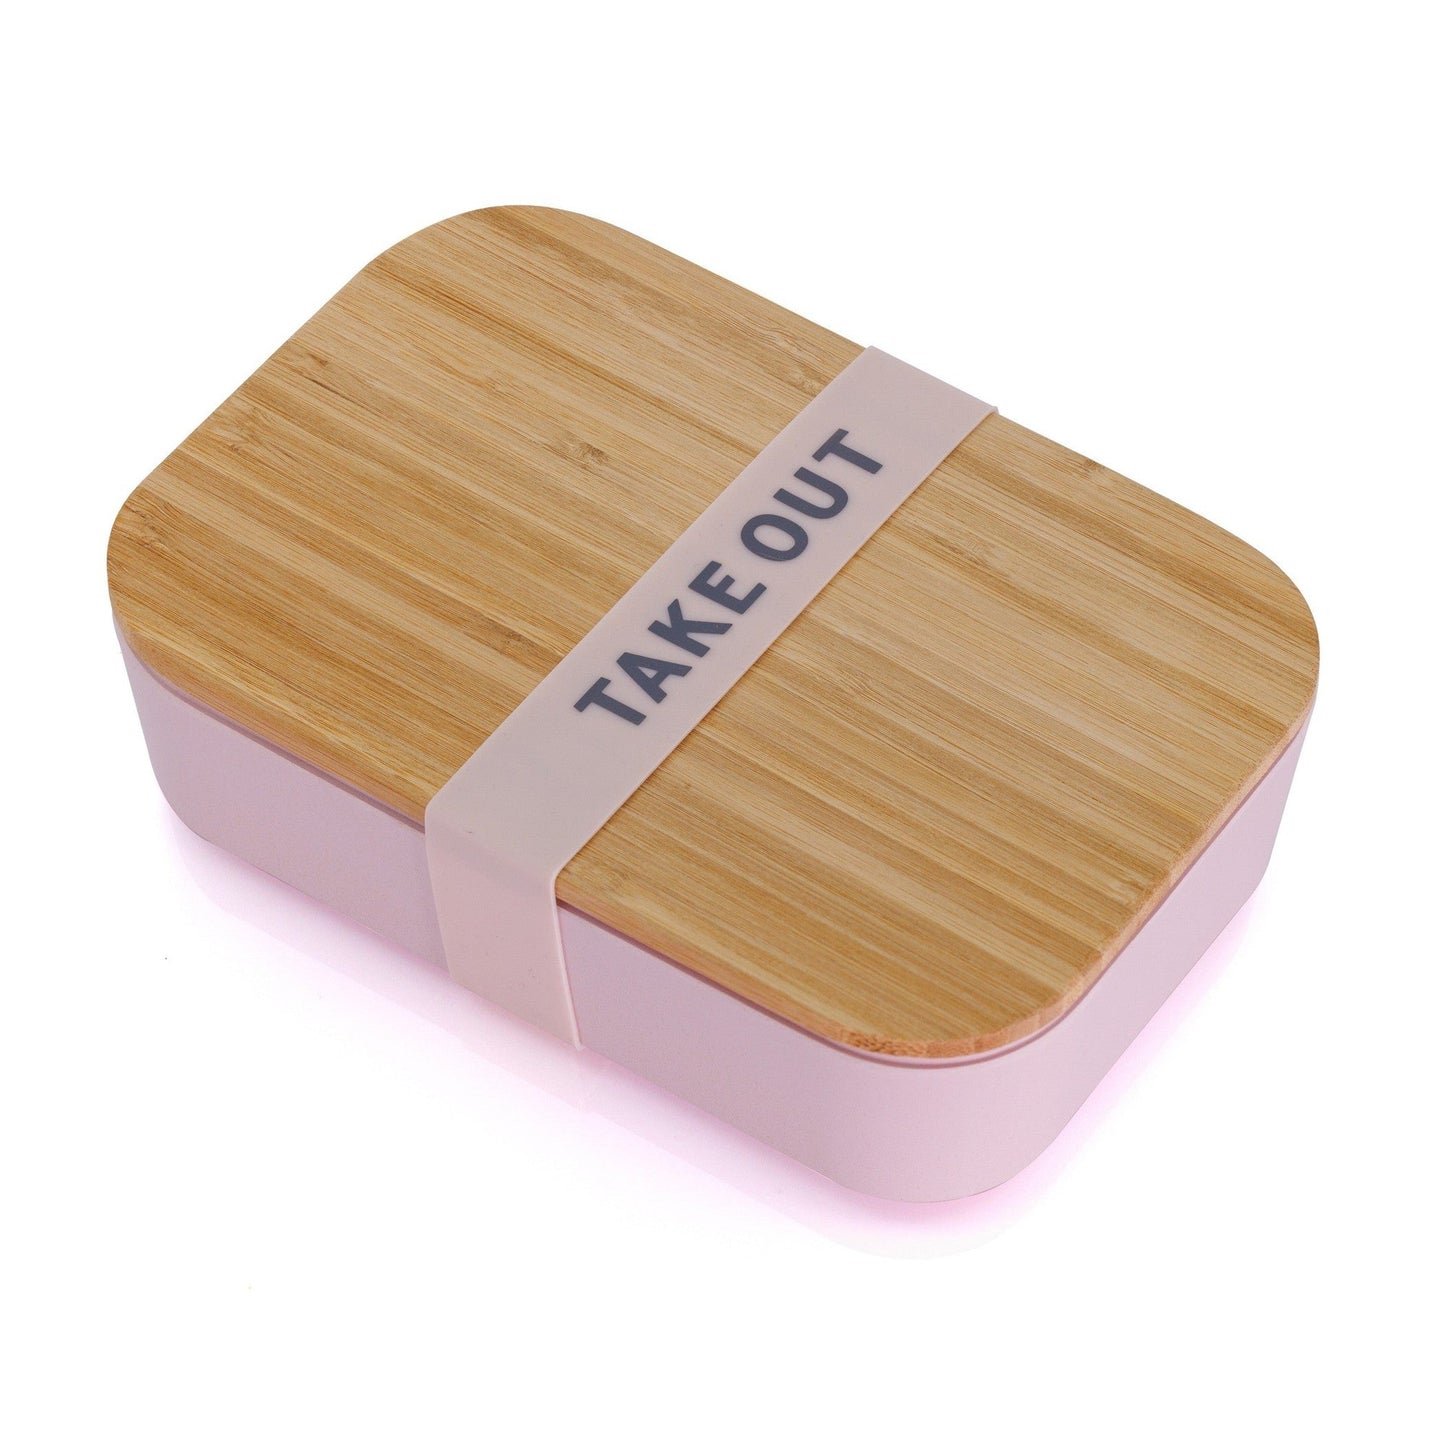 Take Out Bamboo Lunch Box in Blush Pink | Eco-Friendly and Sustainable | 7.5" x 5" x 2"